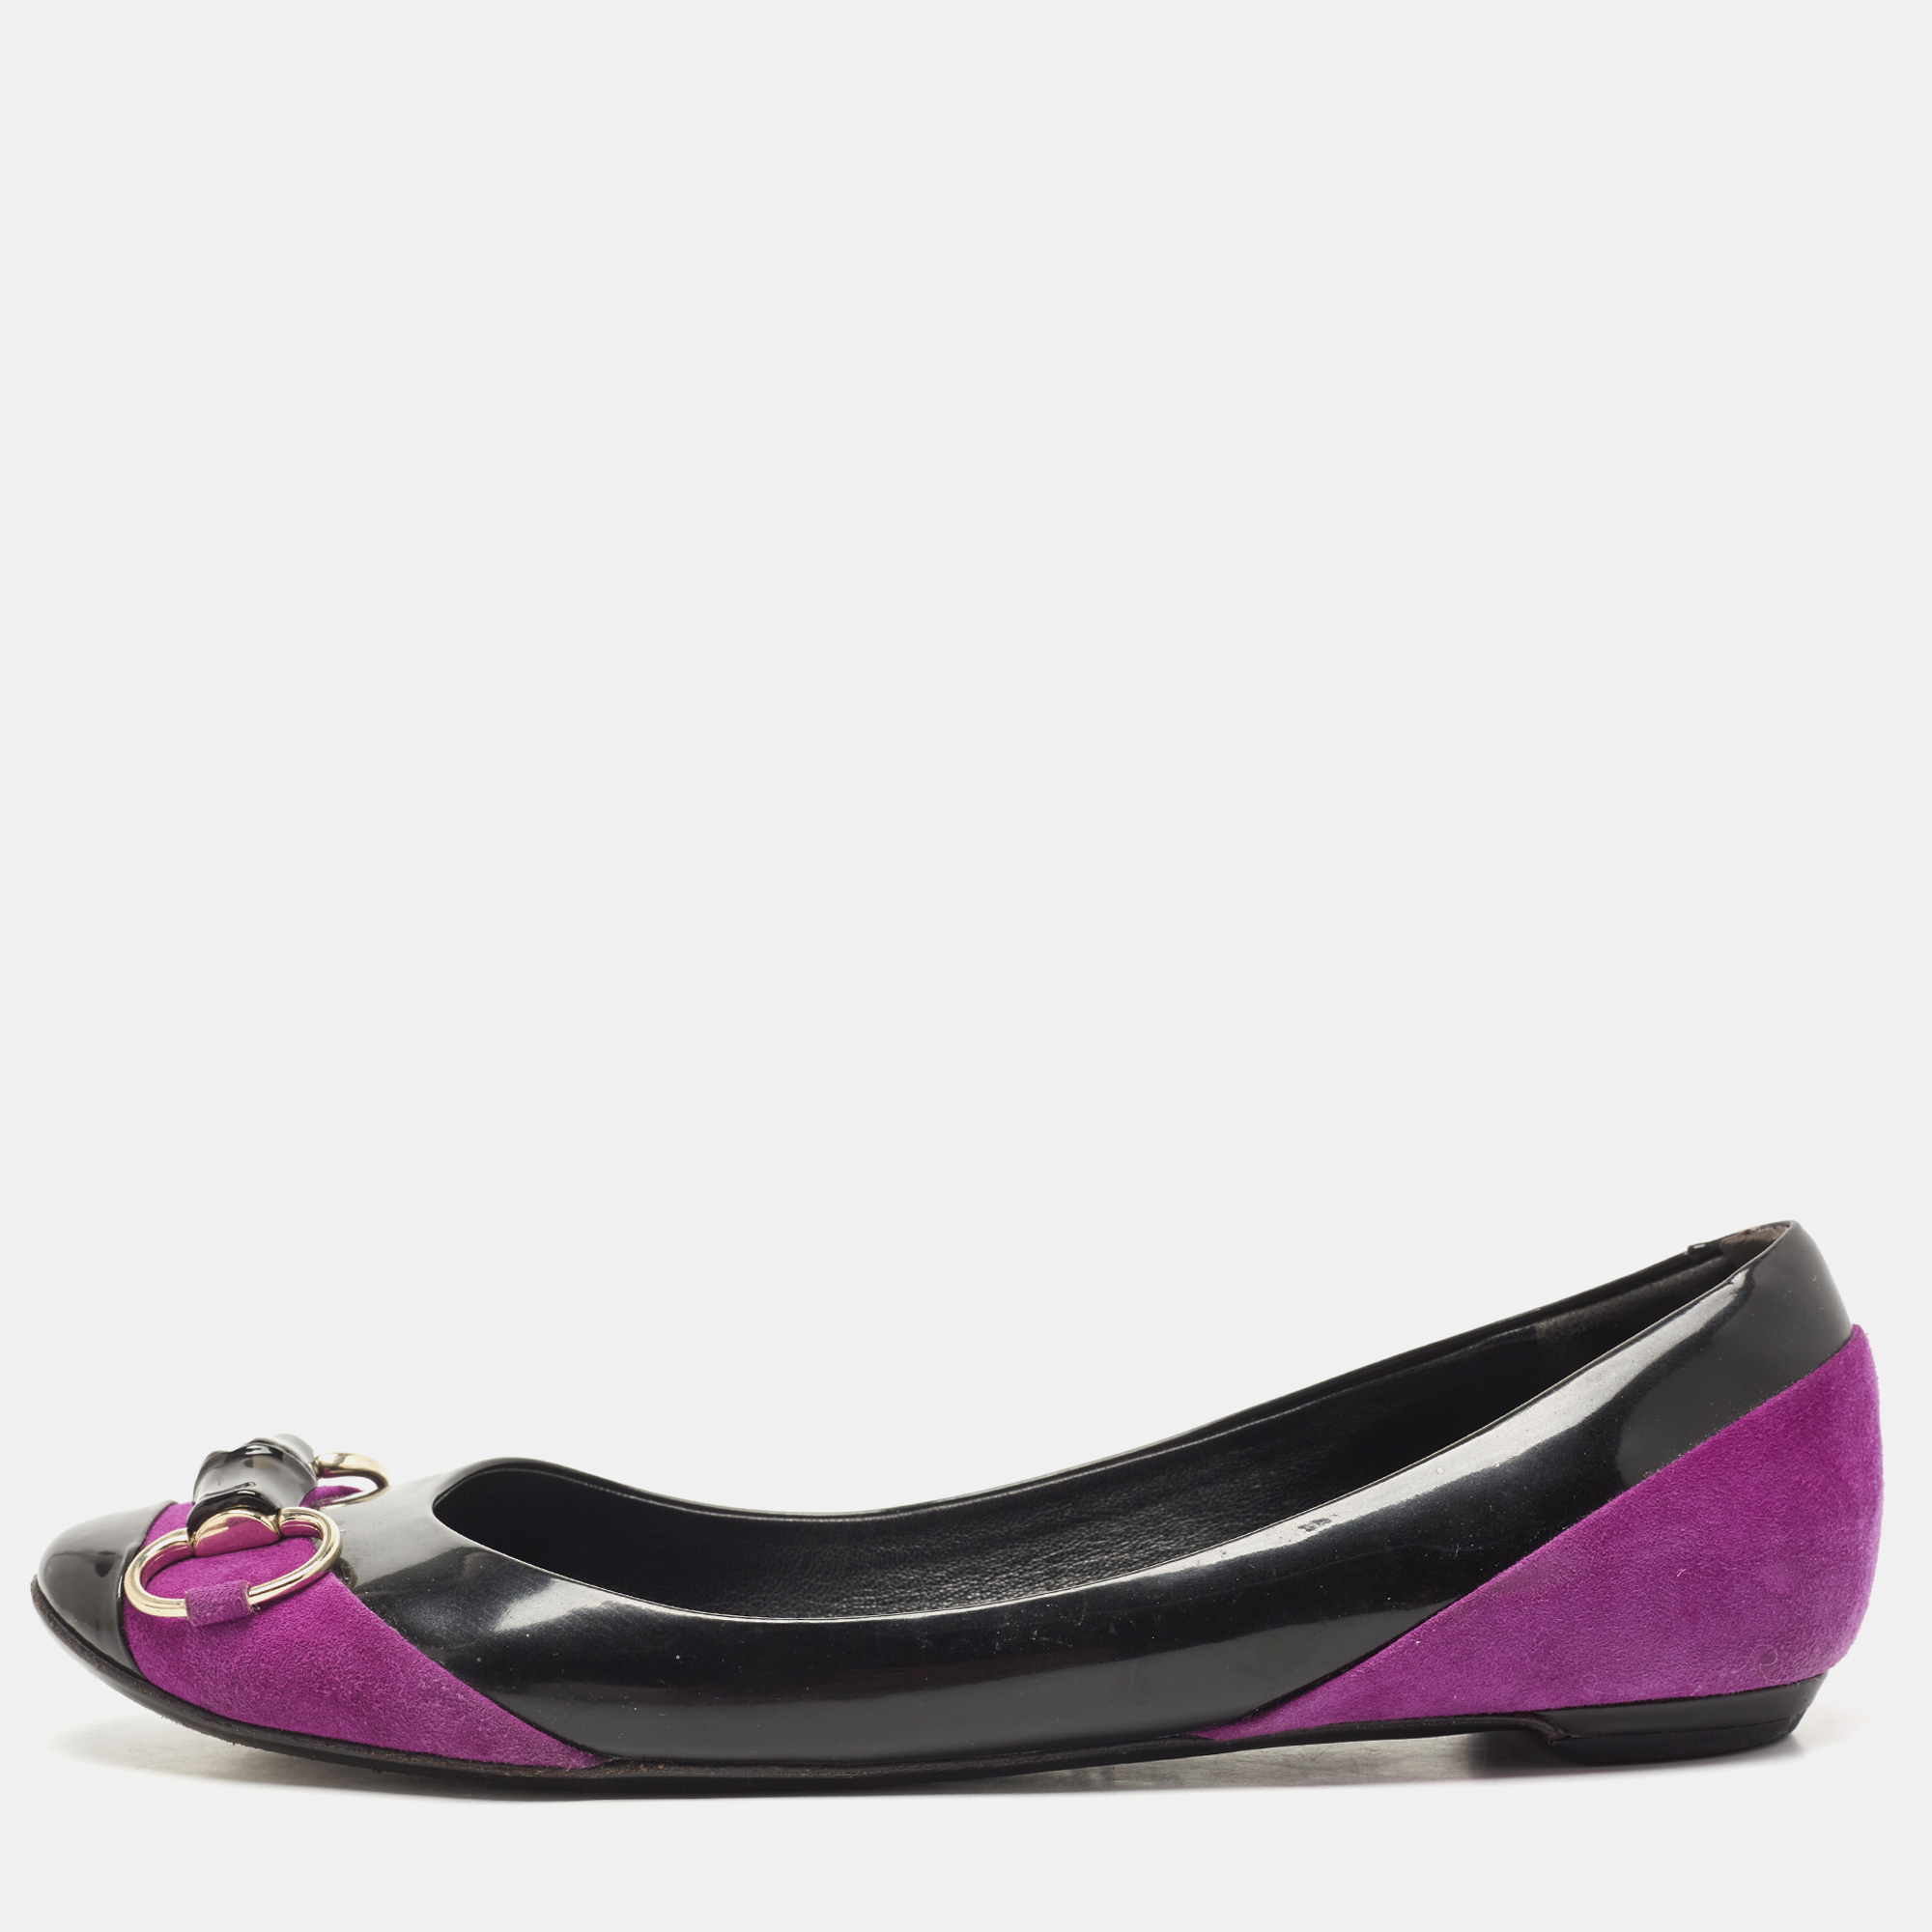 Gucci Purples/Black Patent Leather And Suede Bamboo Horsebit Ballet Flats Size 39.5